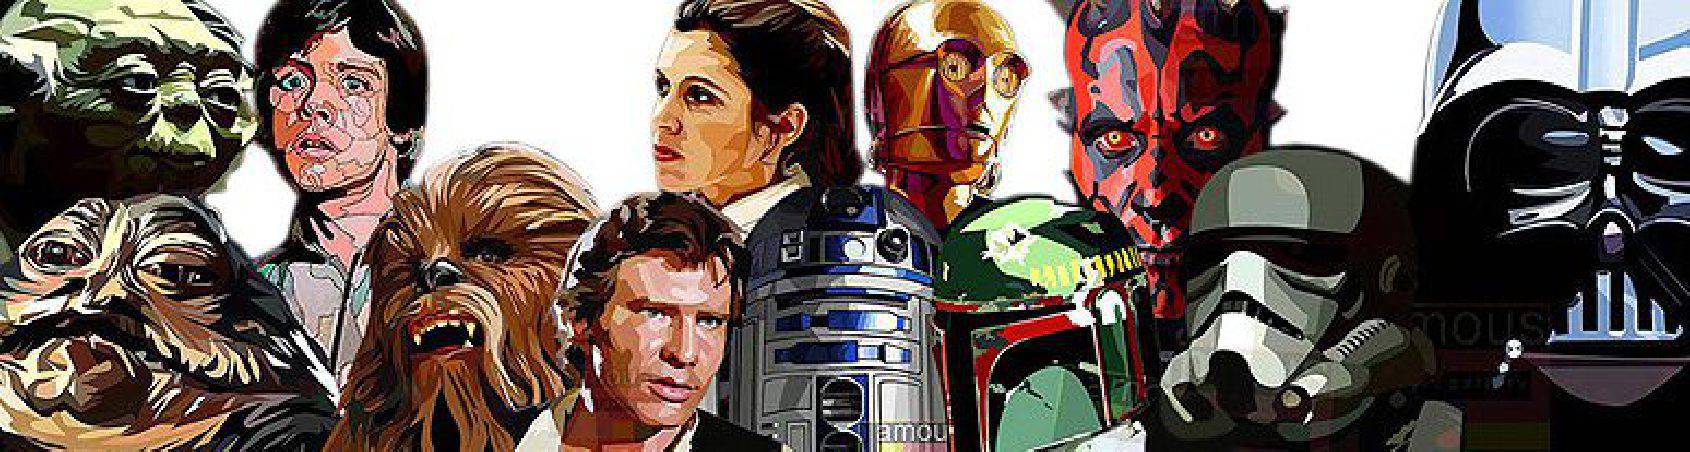 Star-Wars characters | Pop-Art style paintings to decorate